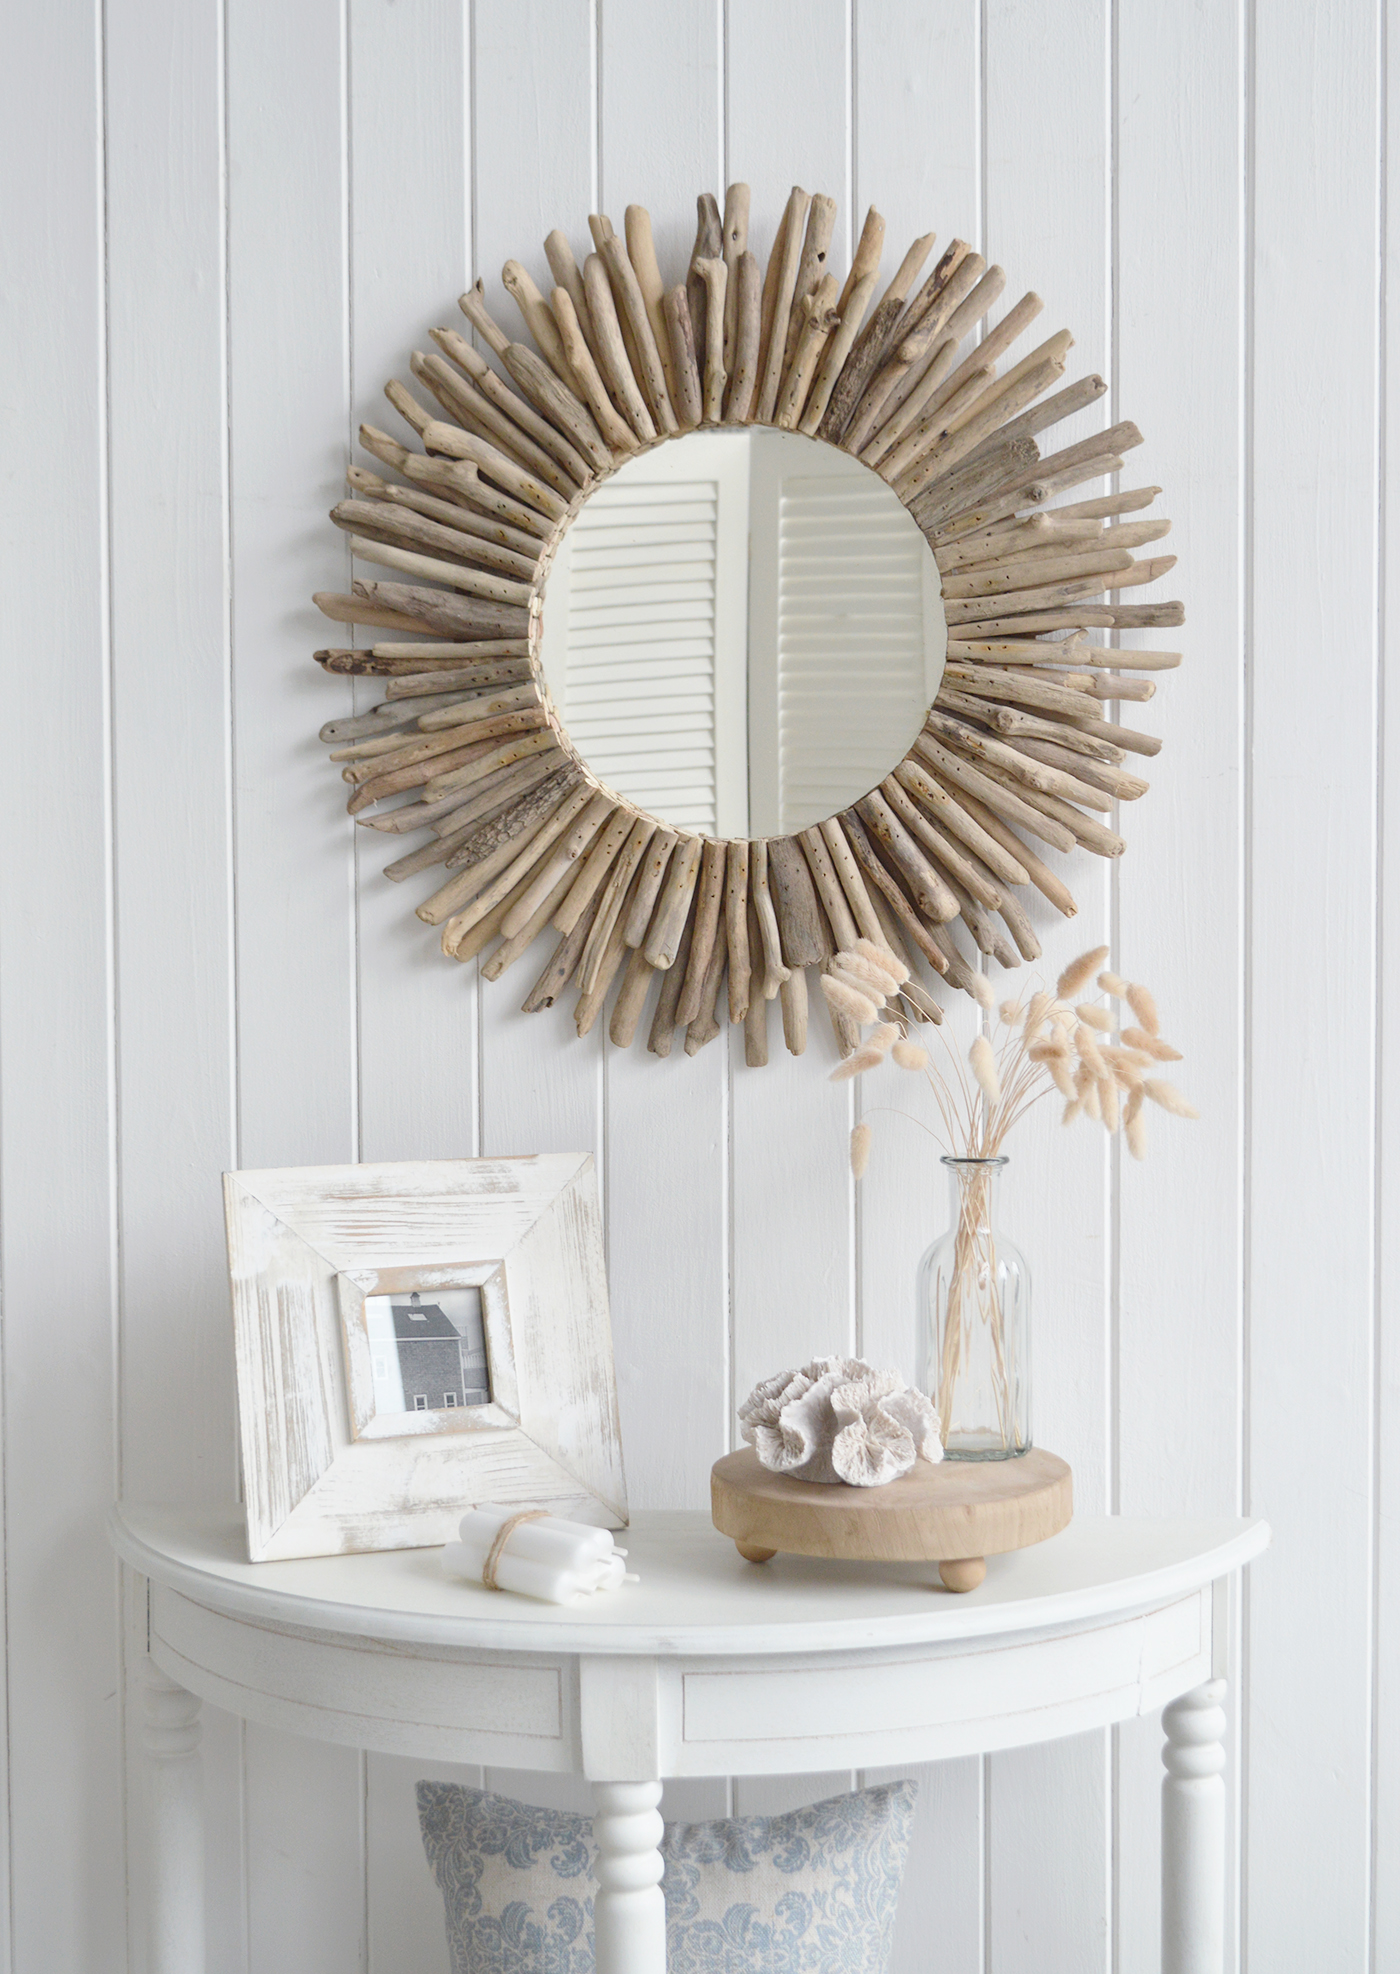 Coastal mirror crafted from driftwood pieces to complement our Beach house style New England furniture